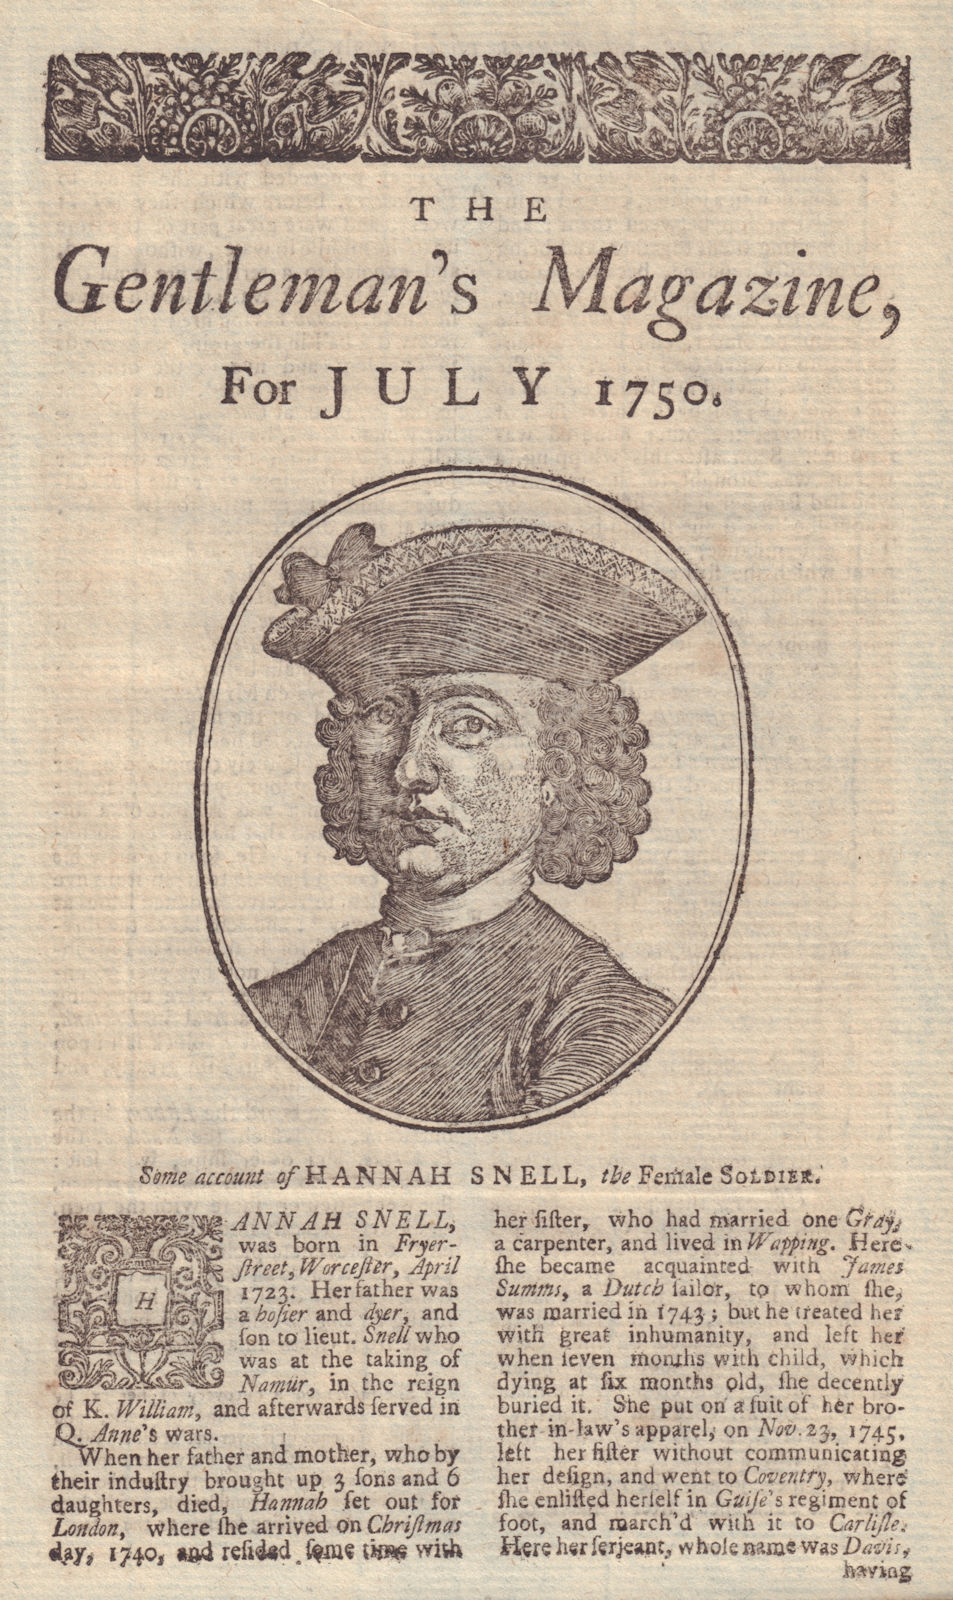 Associate Product Some Account of Hannah Snell, the Female Soldier. GENTS MAG 1750 print